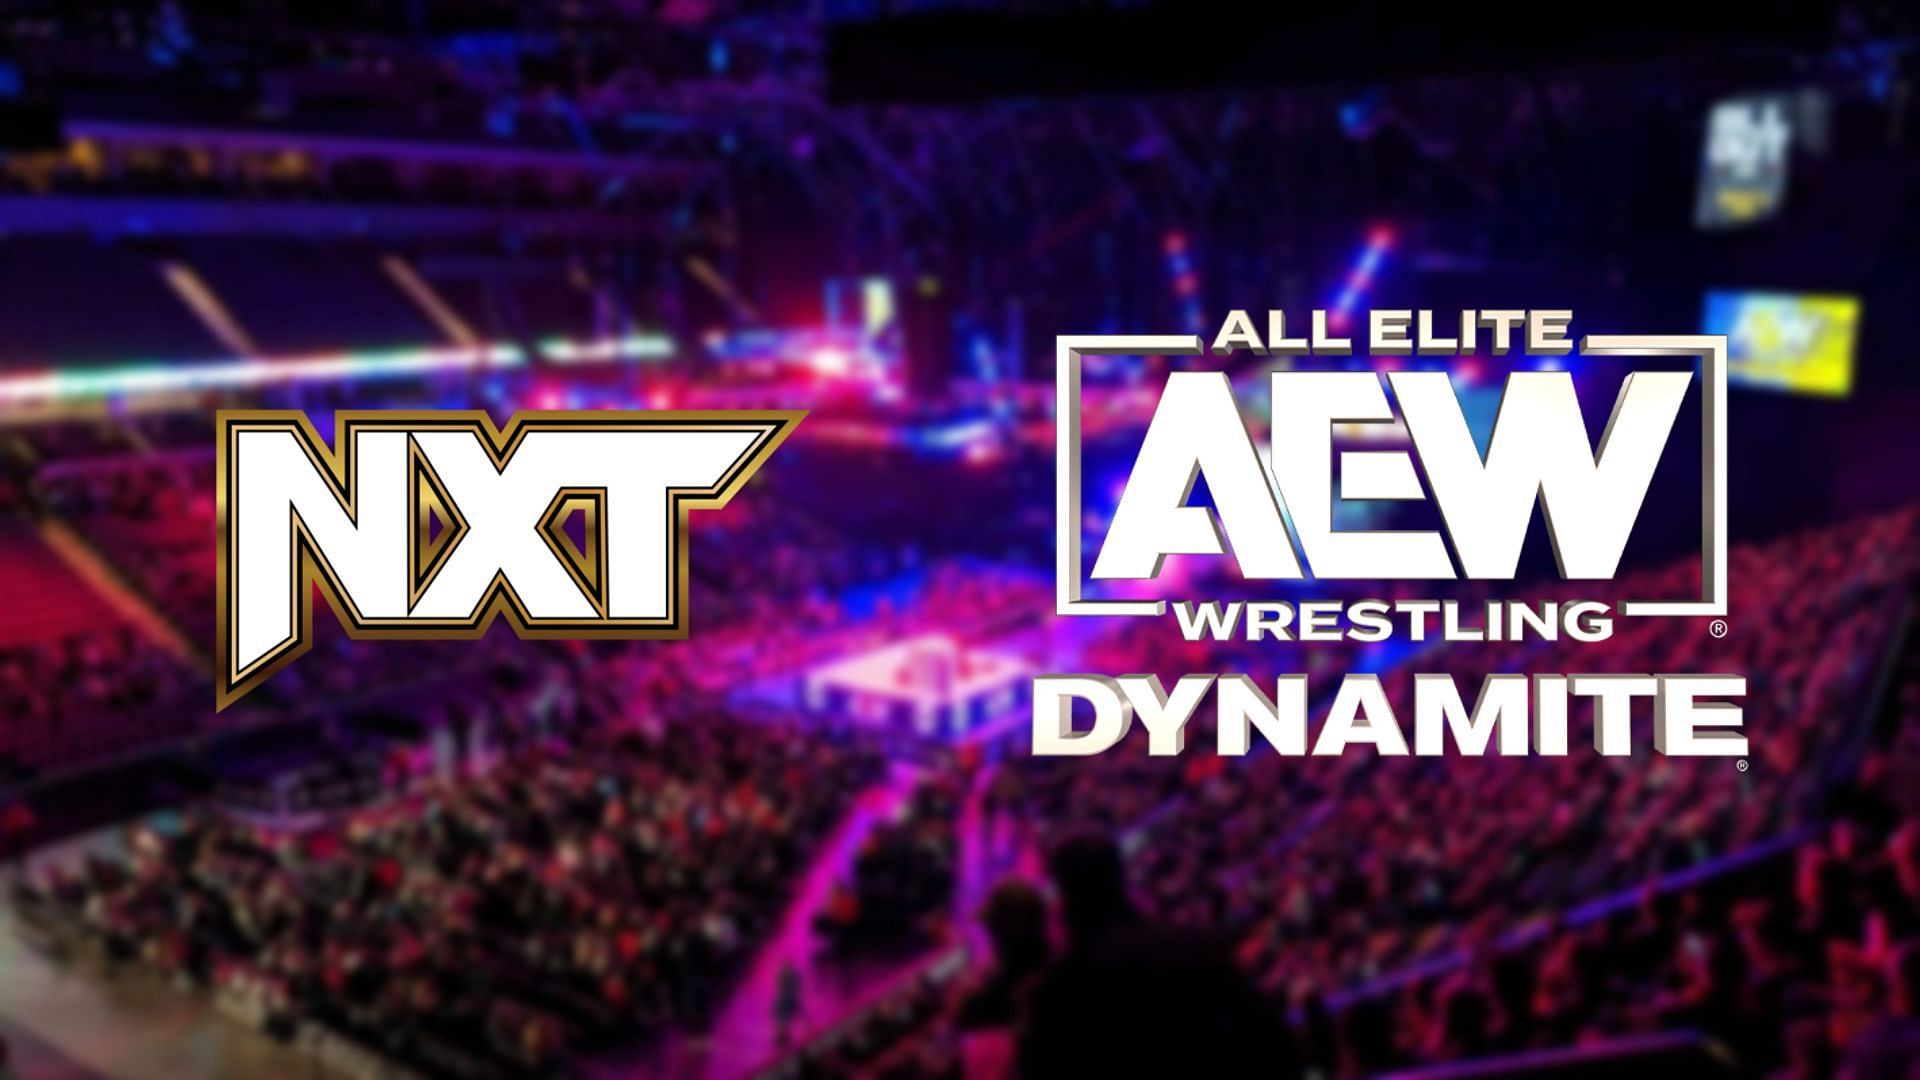 Find out which AEW star has tease surprise appearance ahead of head-to-head between Dynamite and NXT this week